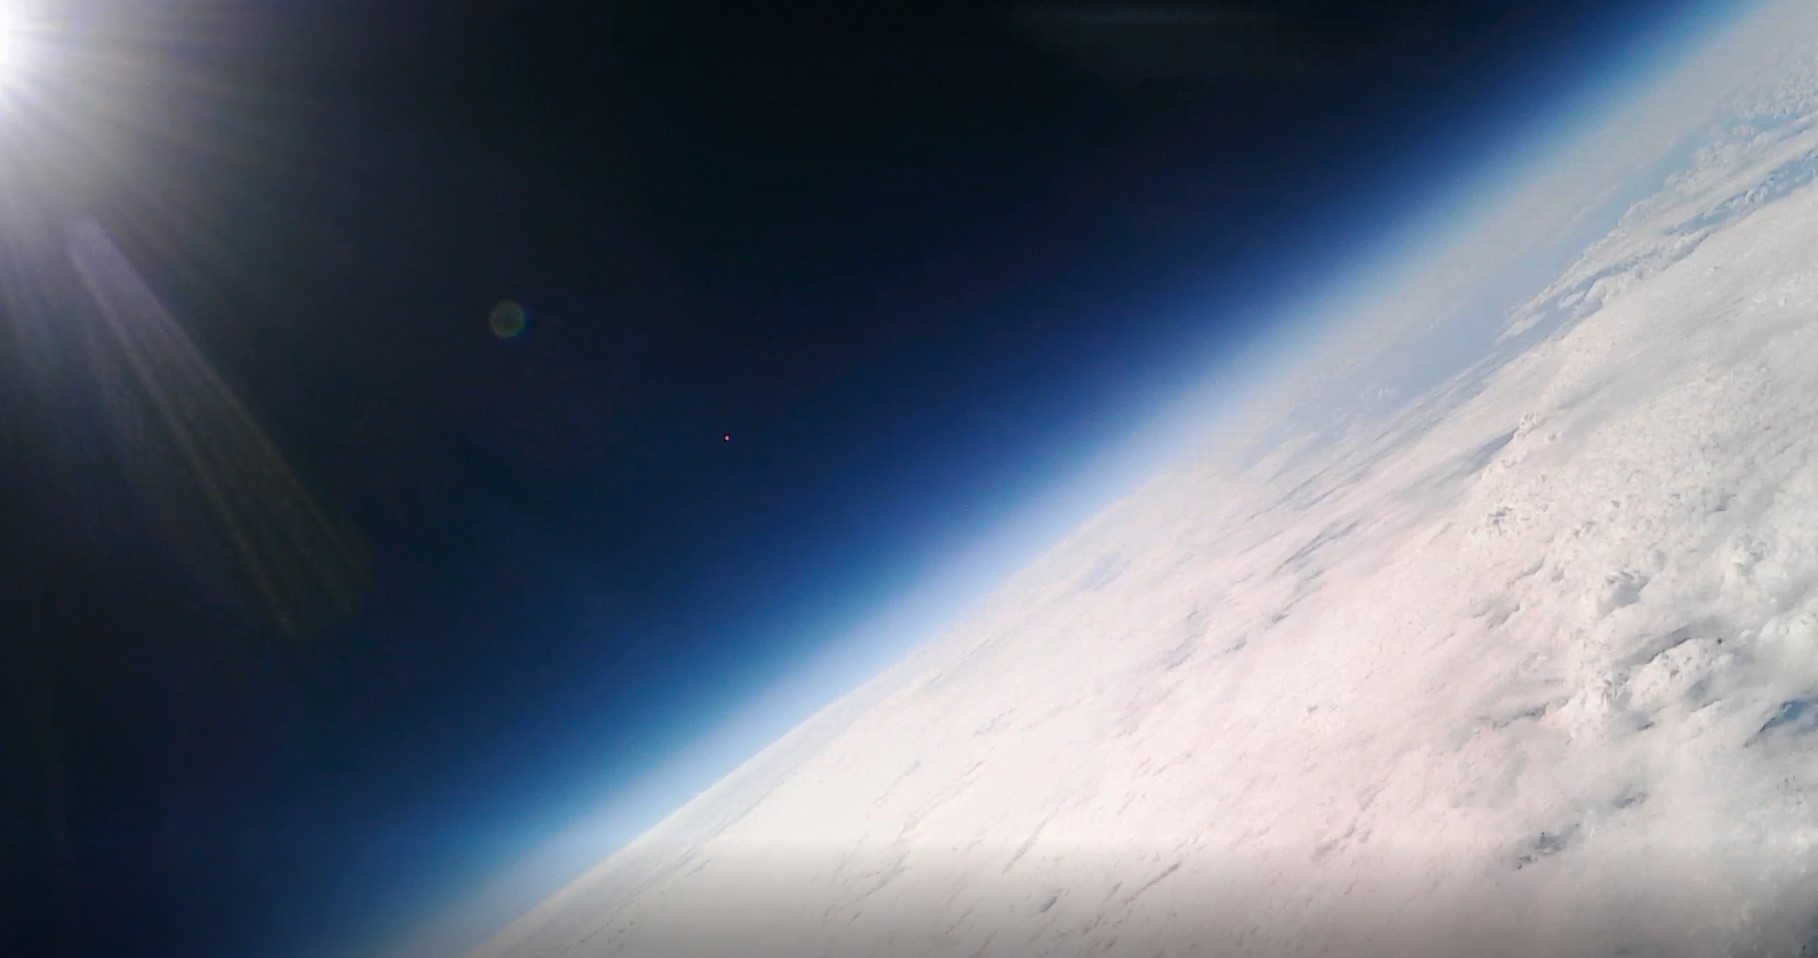 Astrogazers Reach For the Stars With One of the First Double Weather Balloon Launches From a UK School